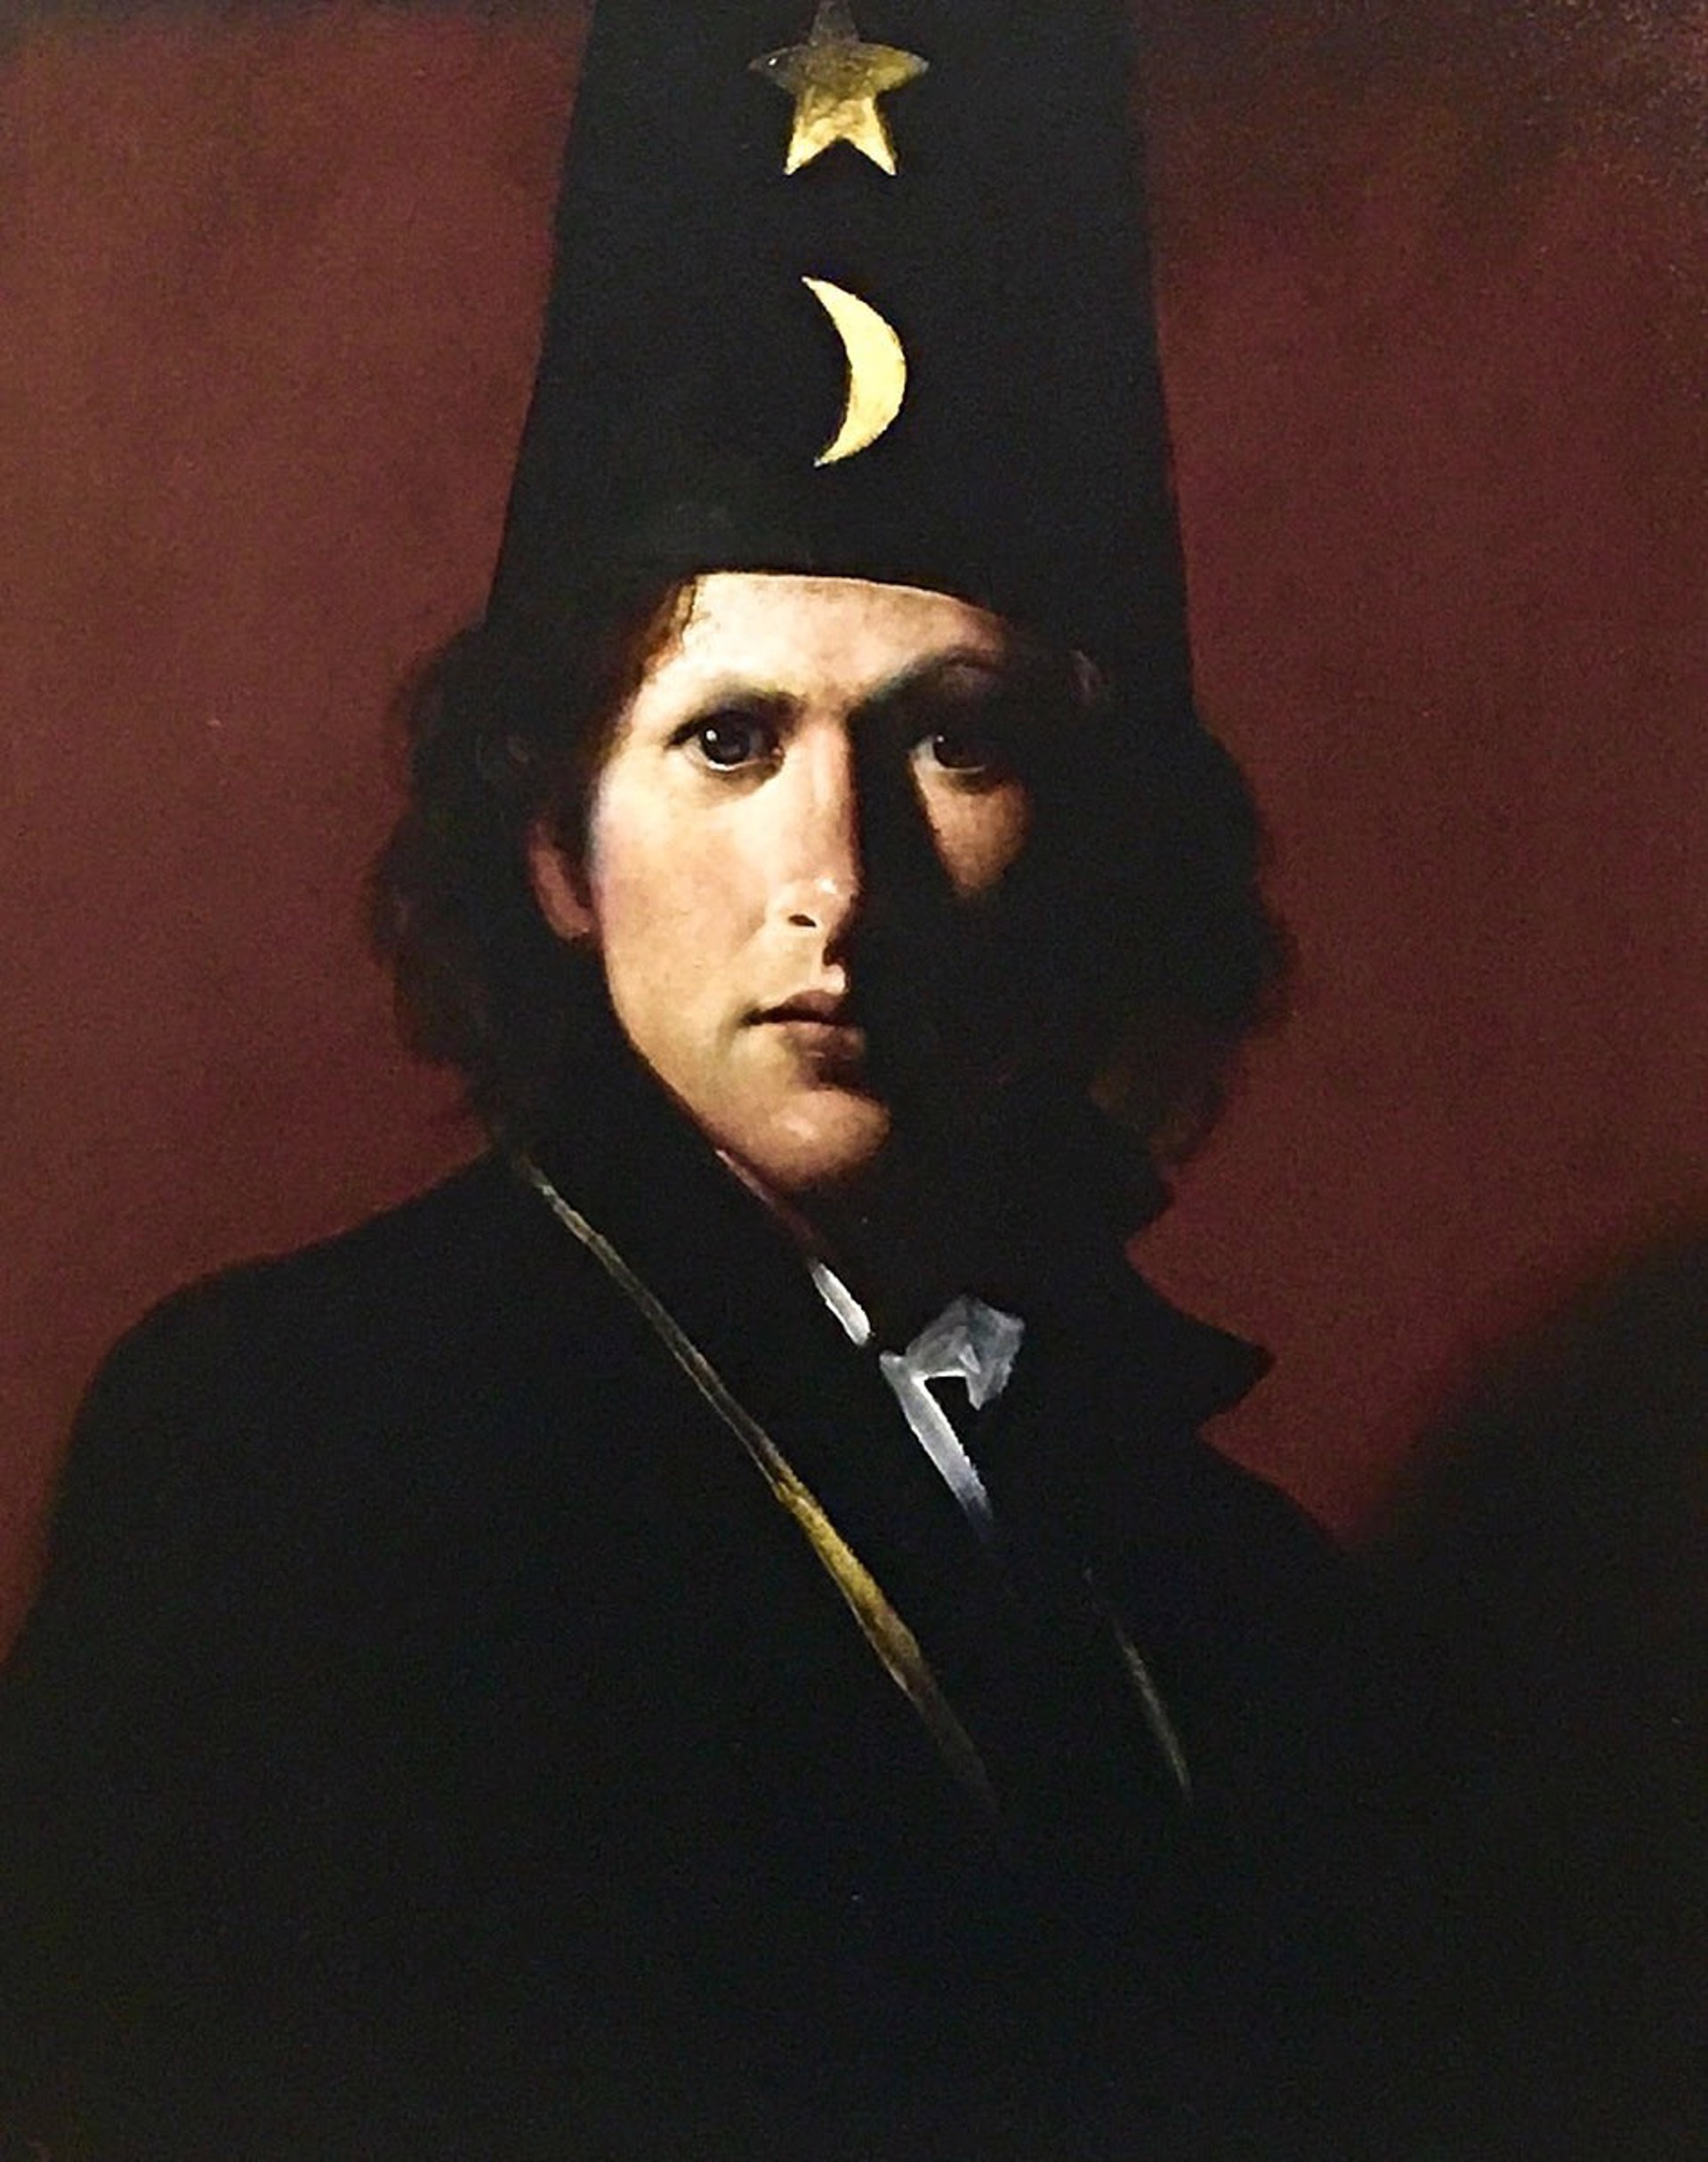 Sorcerer No.  14 by Ray Donley